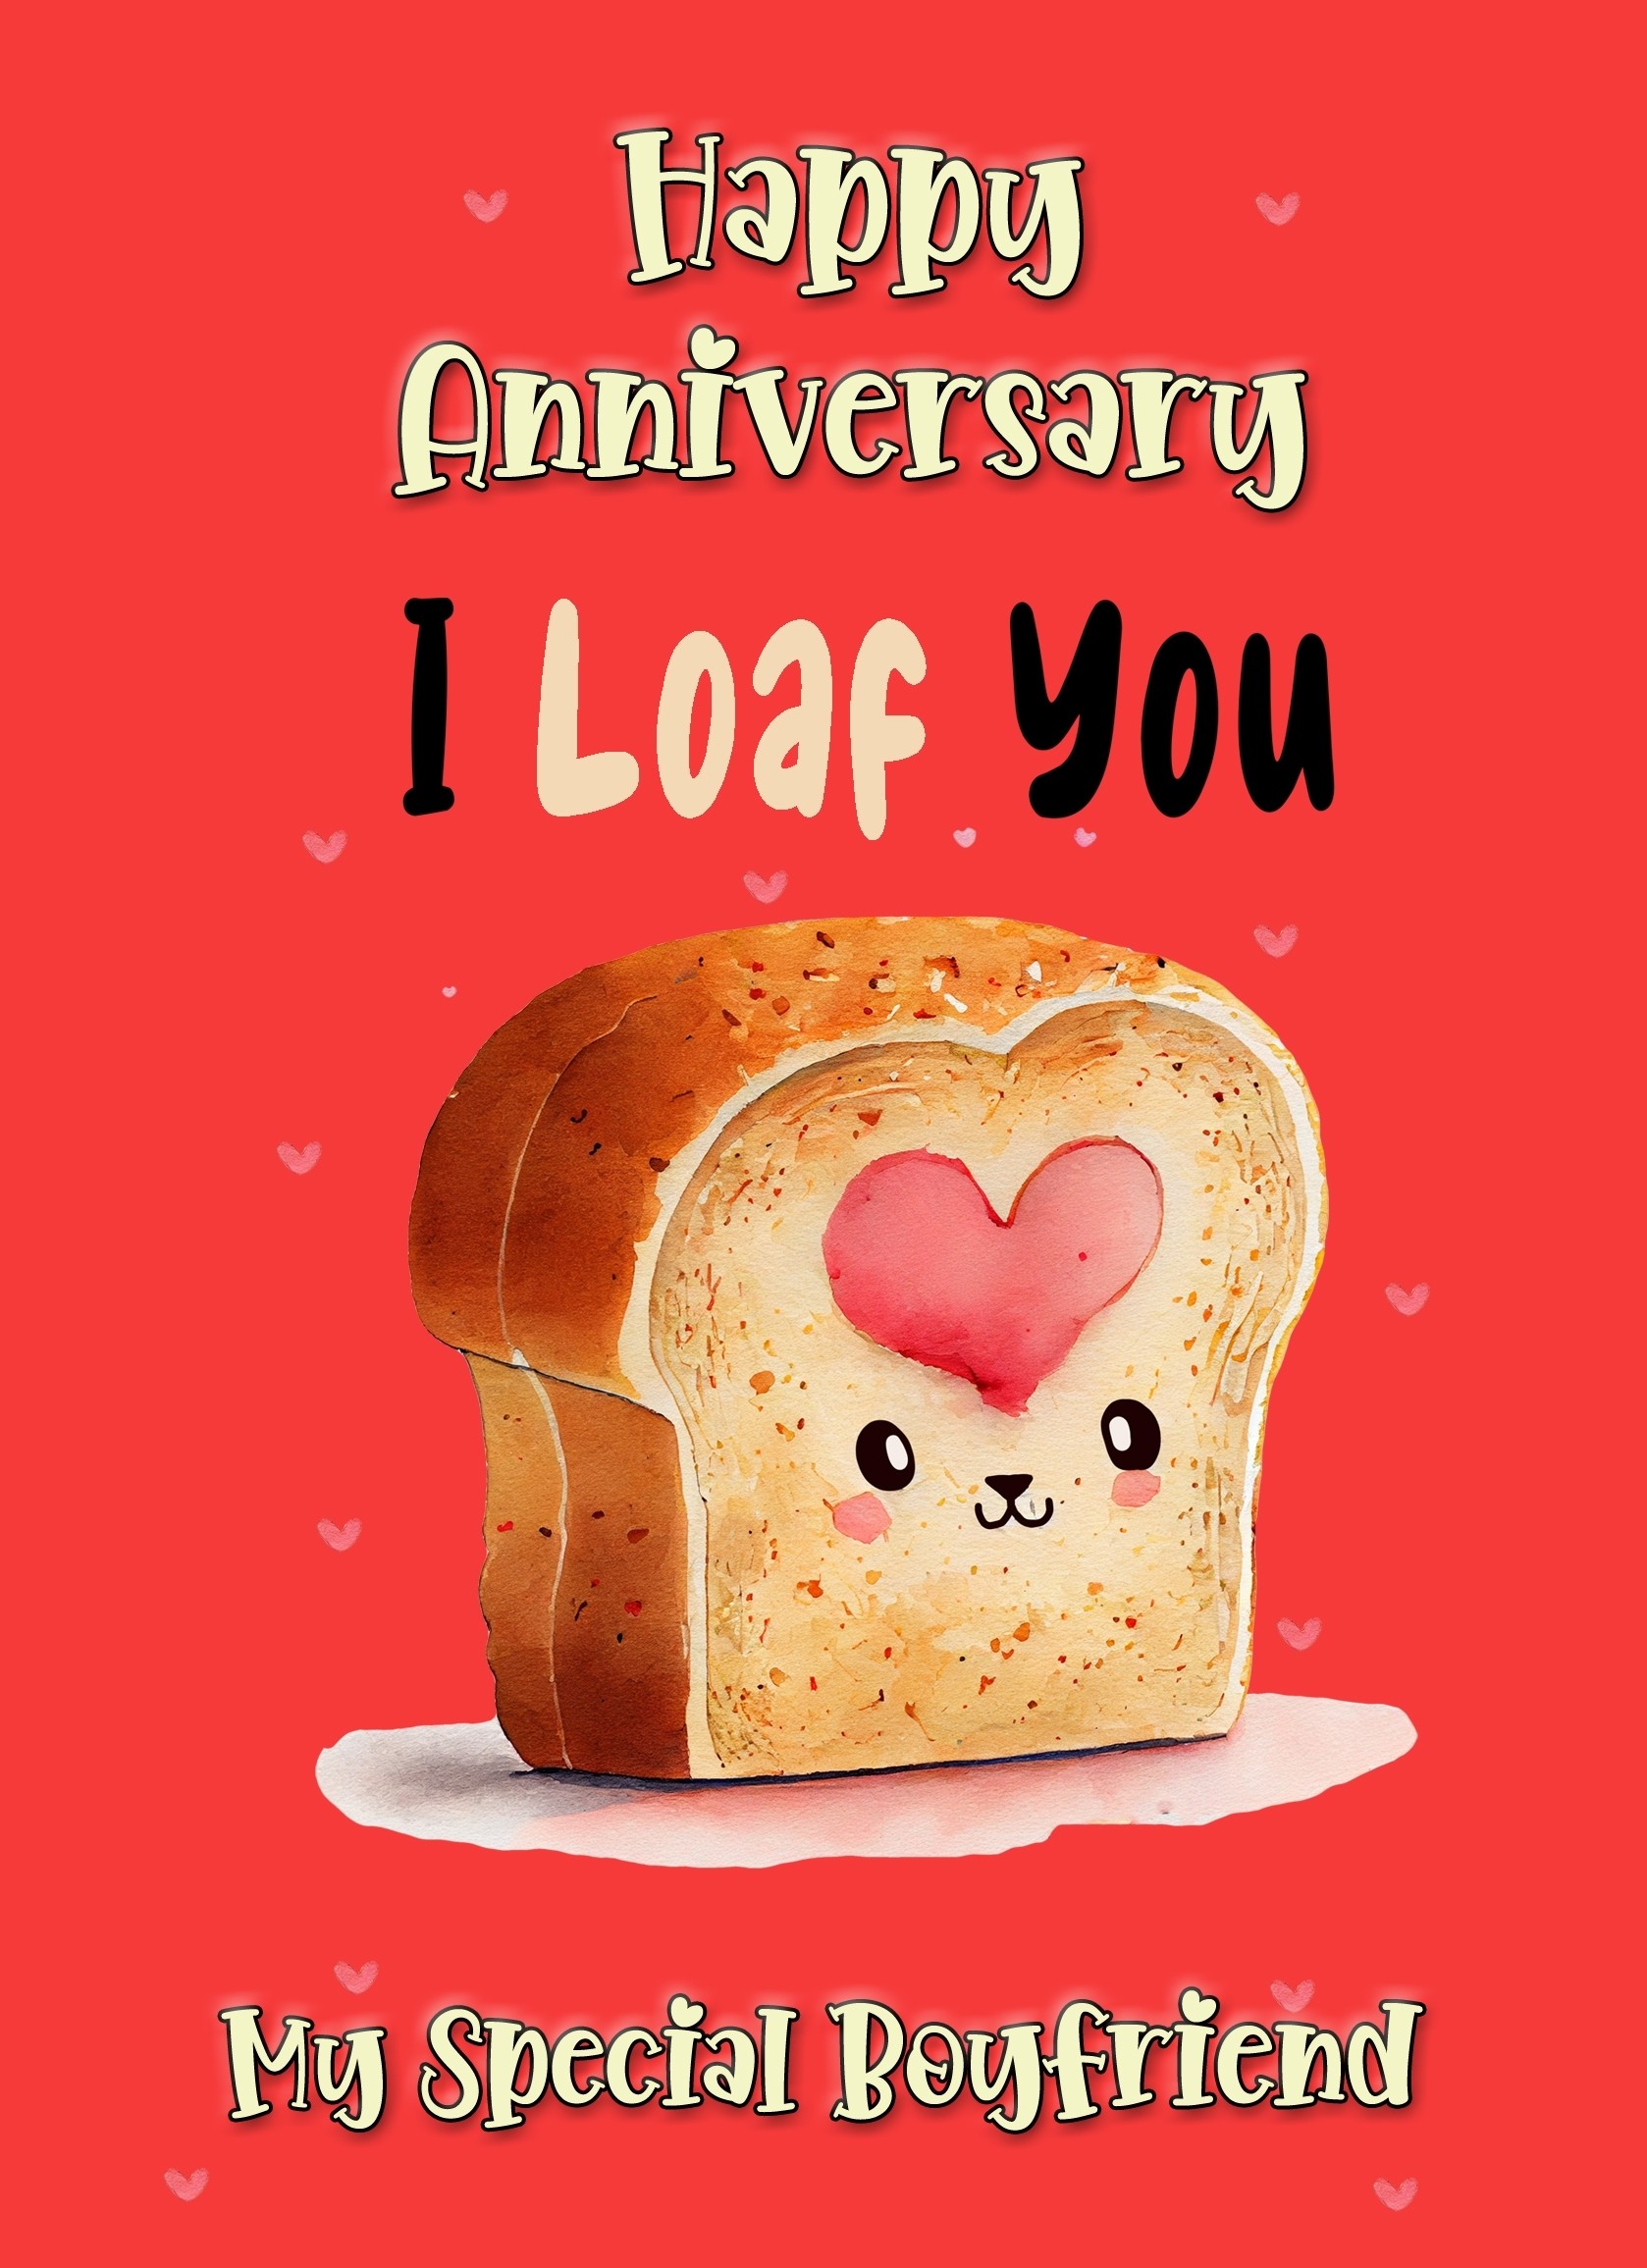 Funny Pun Romantic Anniversary Card for Boyfriend (Loaf You)